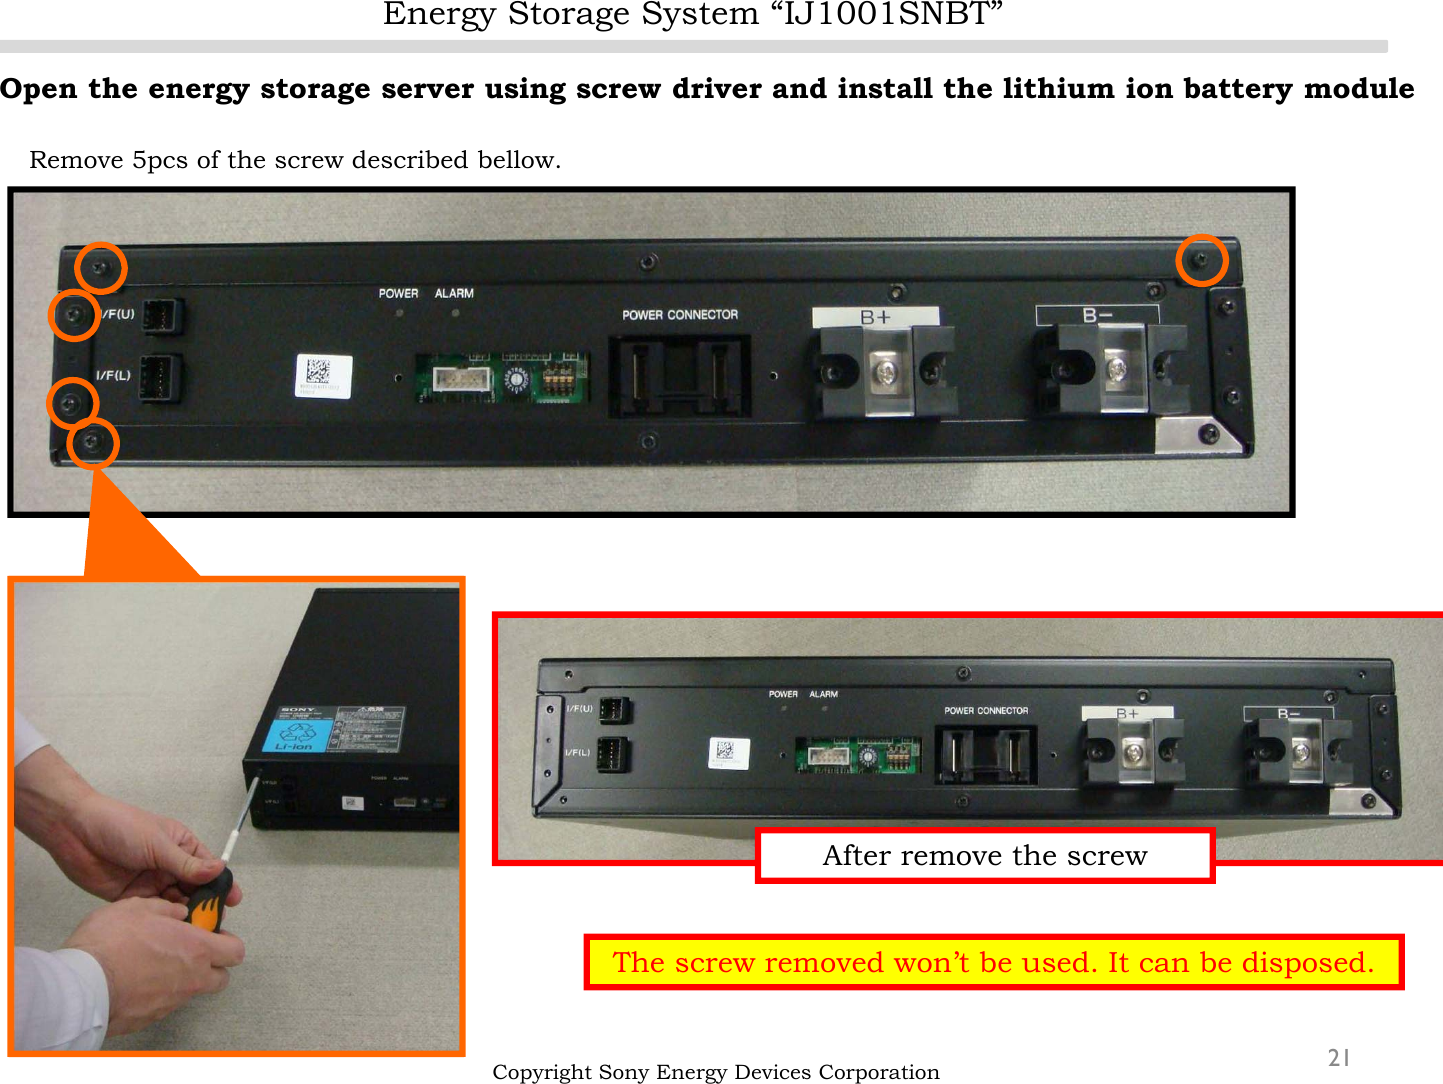 Energy Storage System “IJ1001SNBT”21Open the energy storage server using screw driver and install the lithium ion battery moduleRemove 5pcs of the screw described bellow.Copyright Sony Energy Devices CorporationThe screw removed won’t be used. It can be disposed.After remove the screw